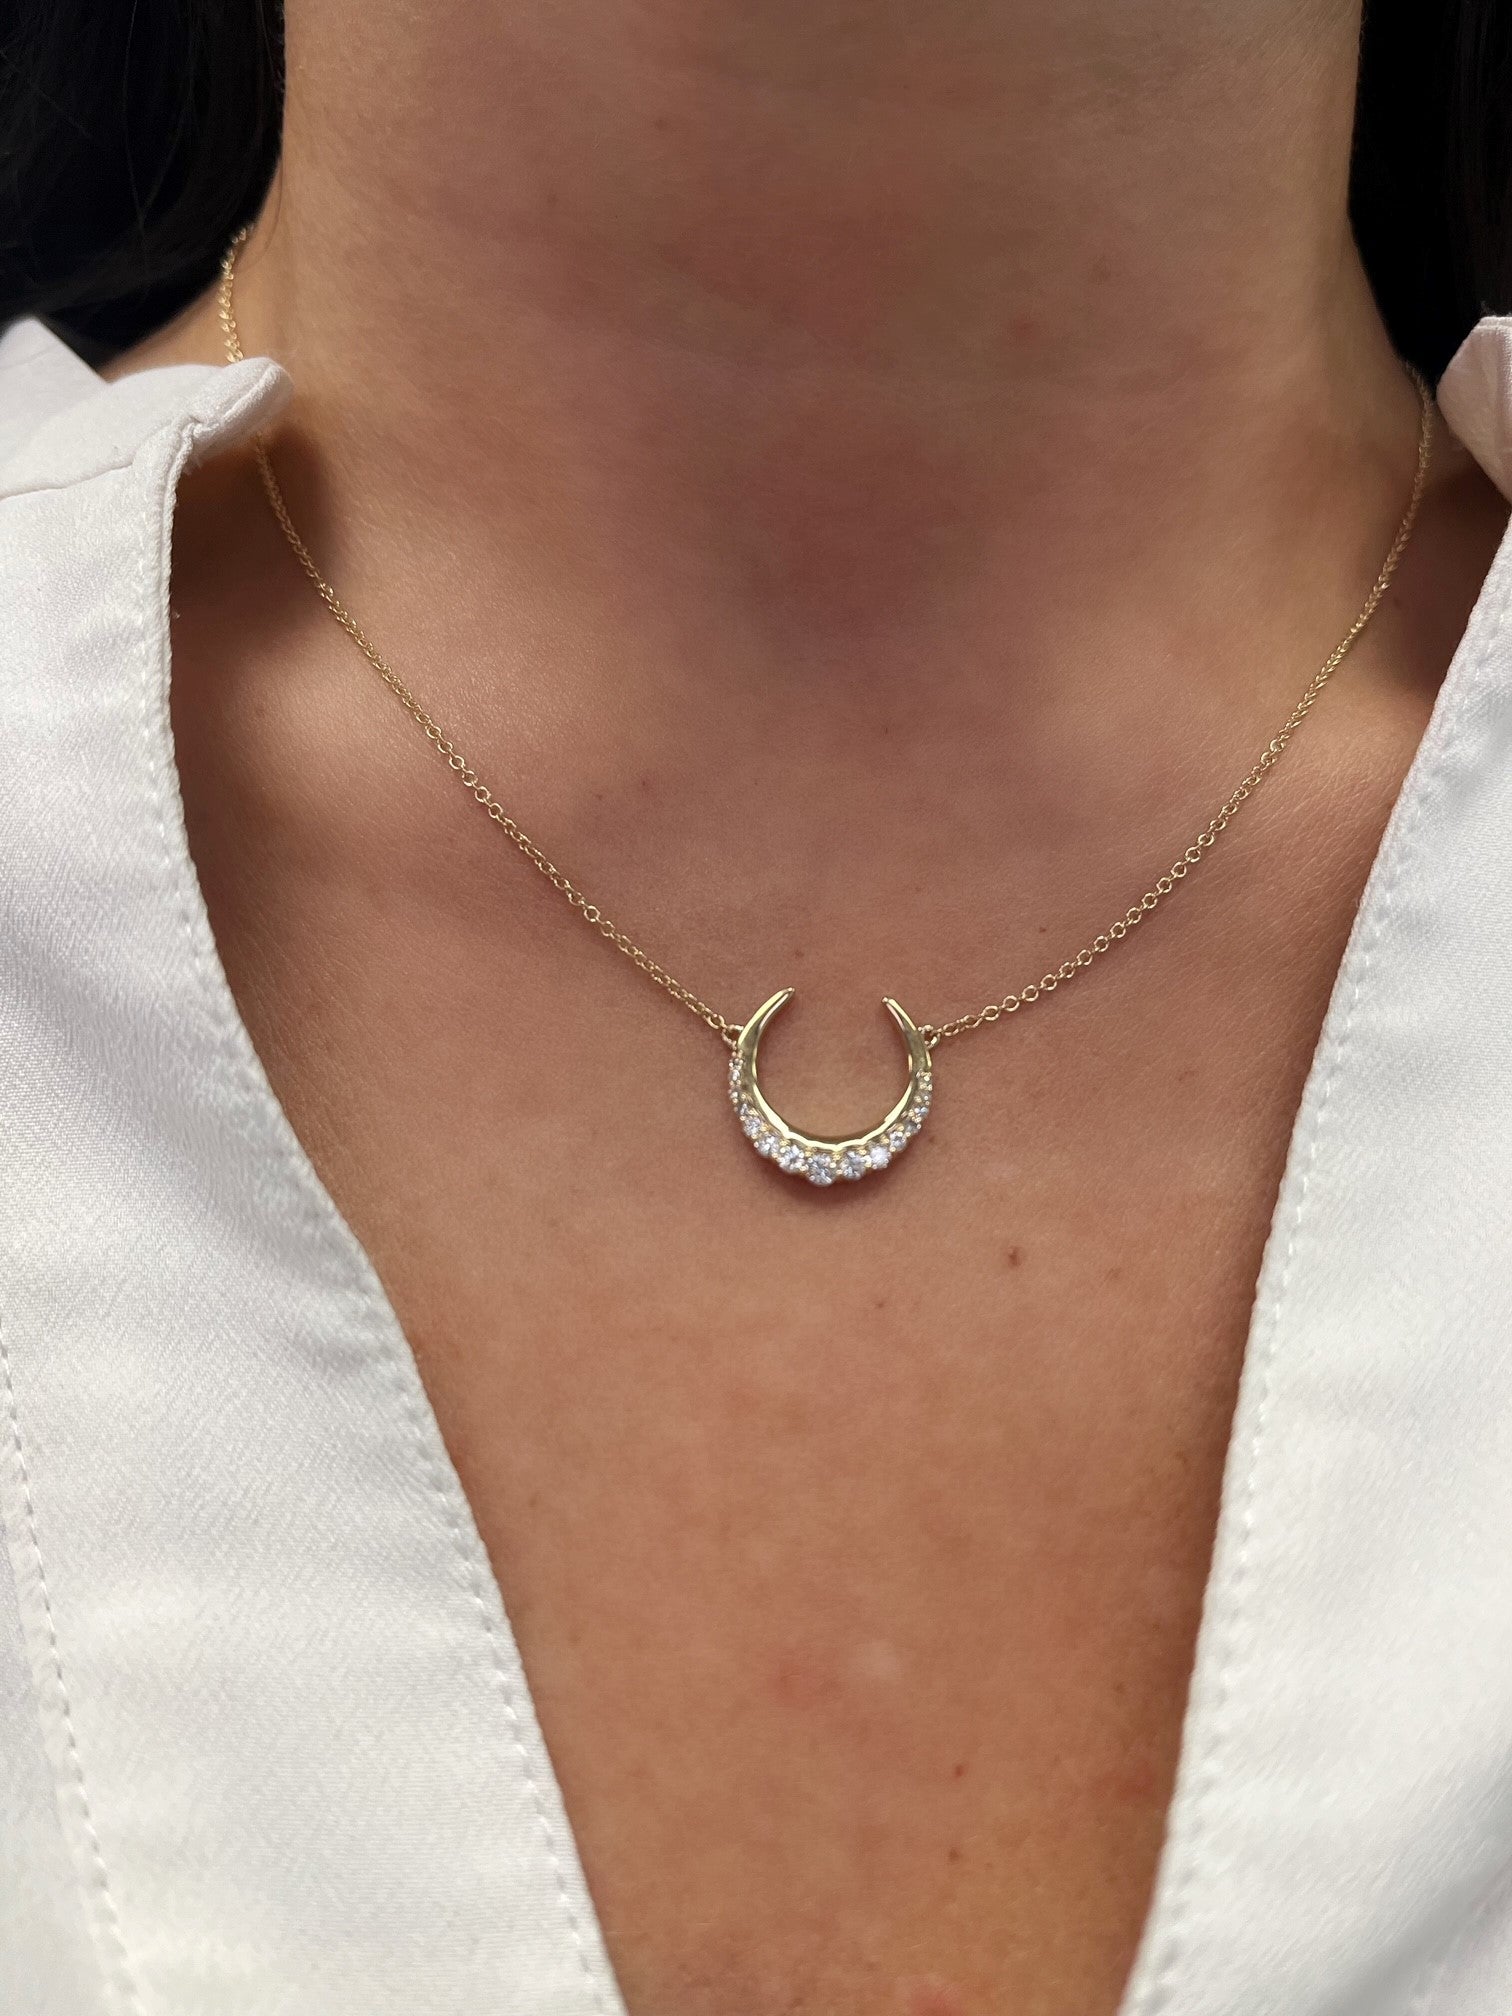 Large Crescent Moon Necklace in Sterling with 24K Gold Plate Overlay,  Bohemian Moon Necklaces, Statement 2 Inch Large Waxing Waning Moon